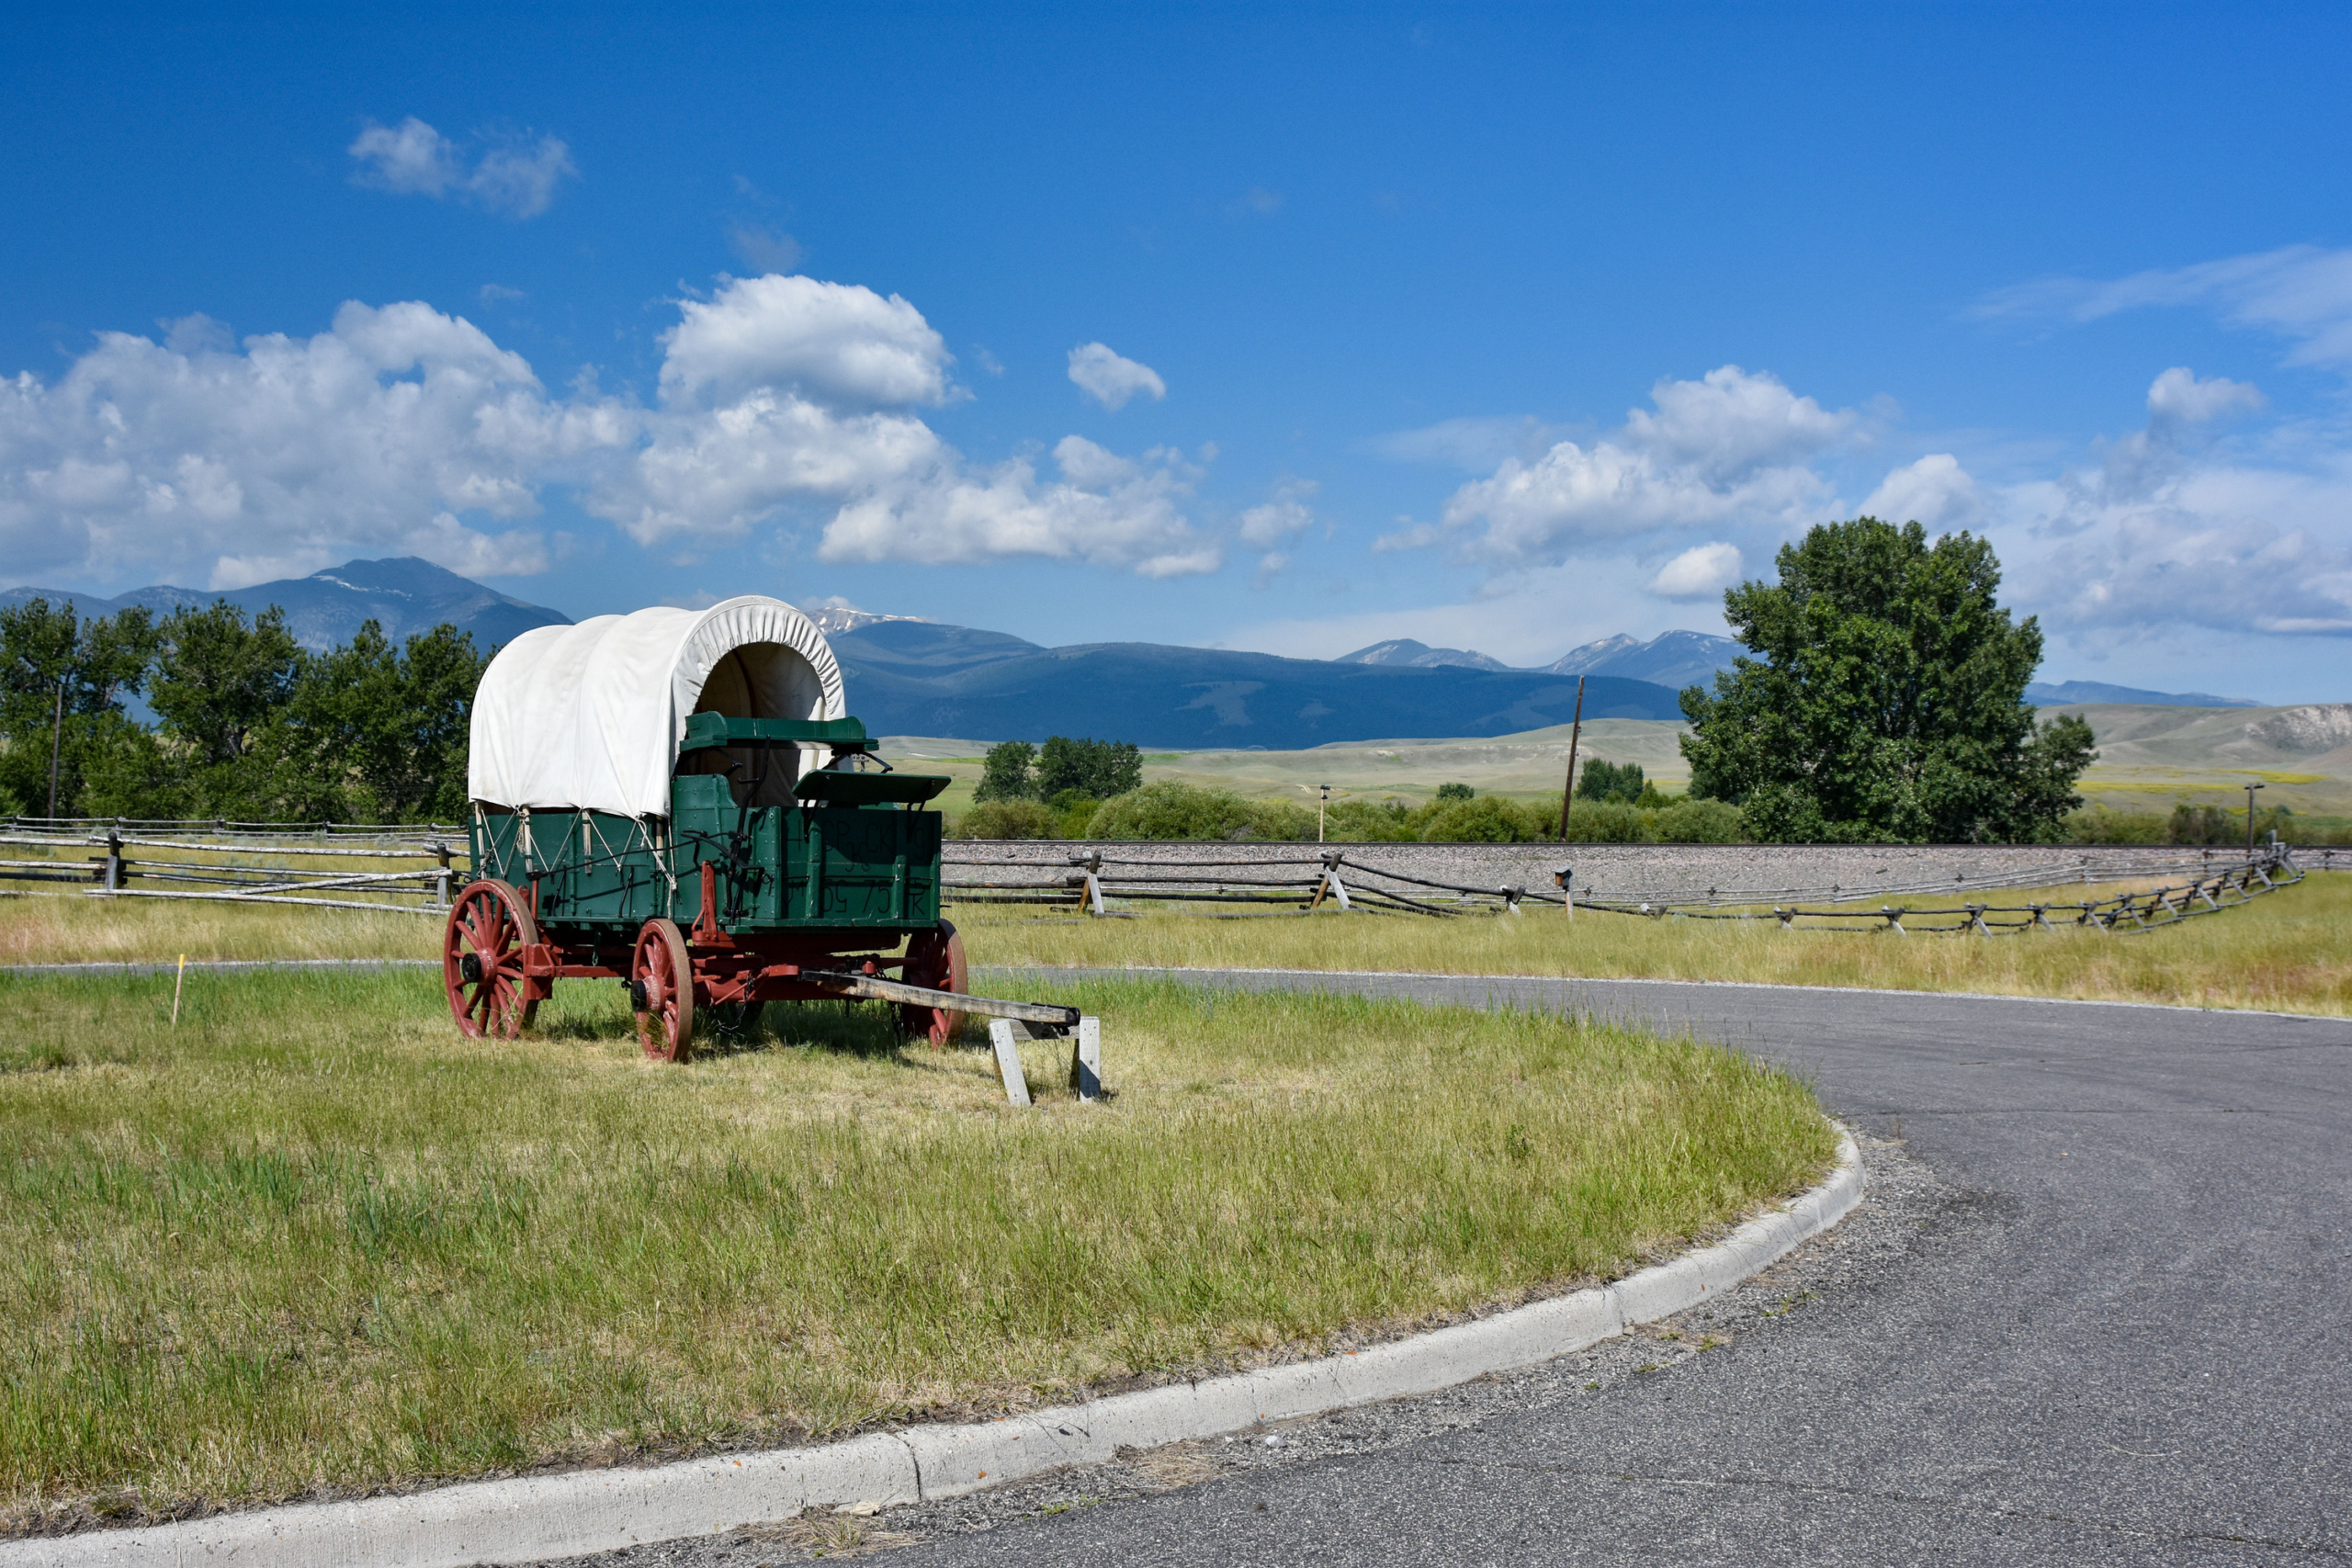 The covered wagon at Grant-Kohrs Ranch National Historic Site is one of the non-contributing features added after the period of significance for visitor interpretation.